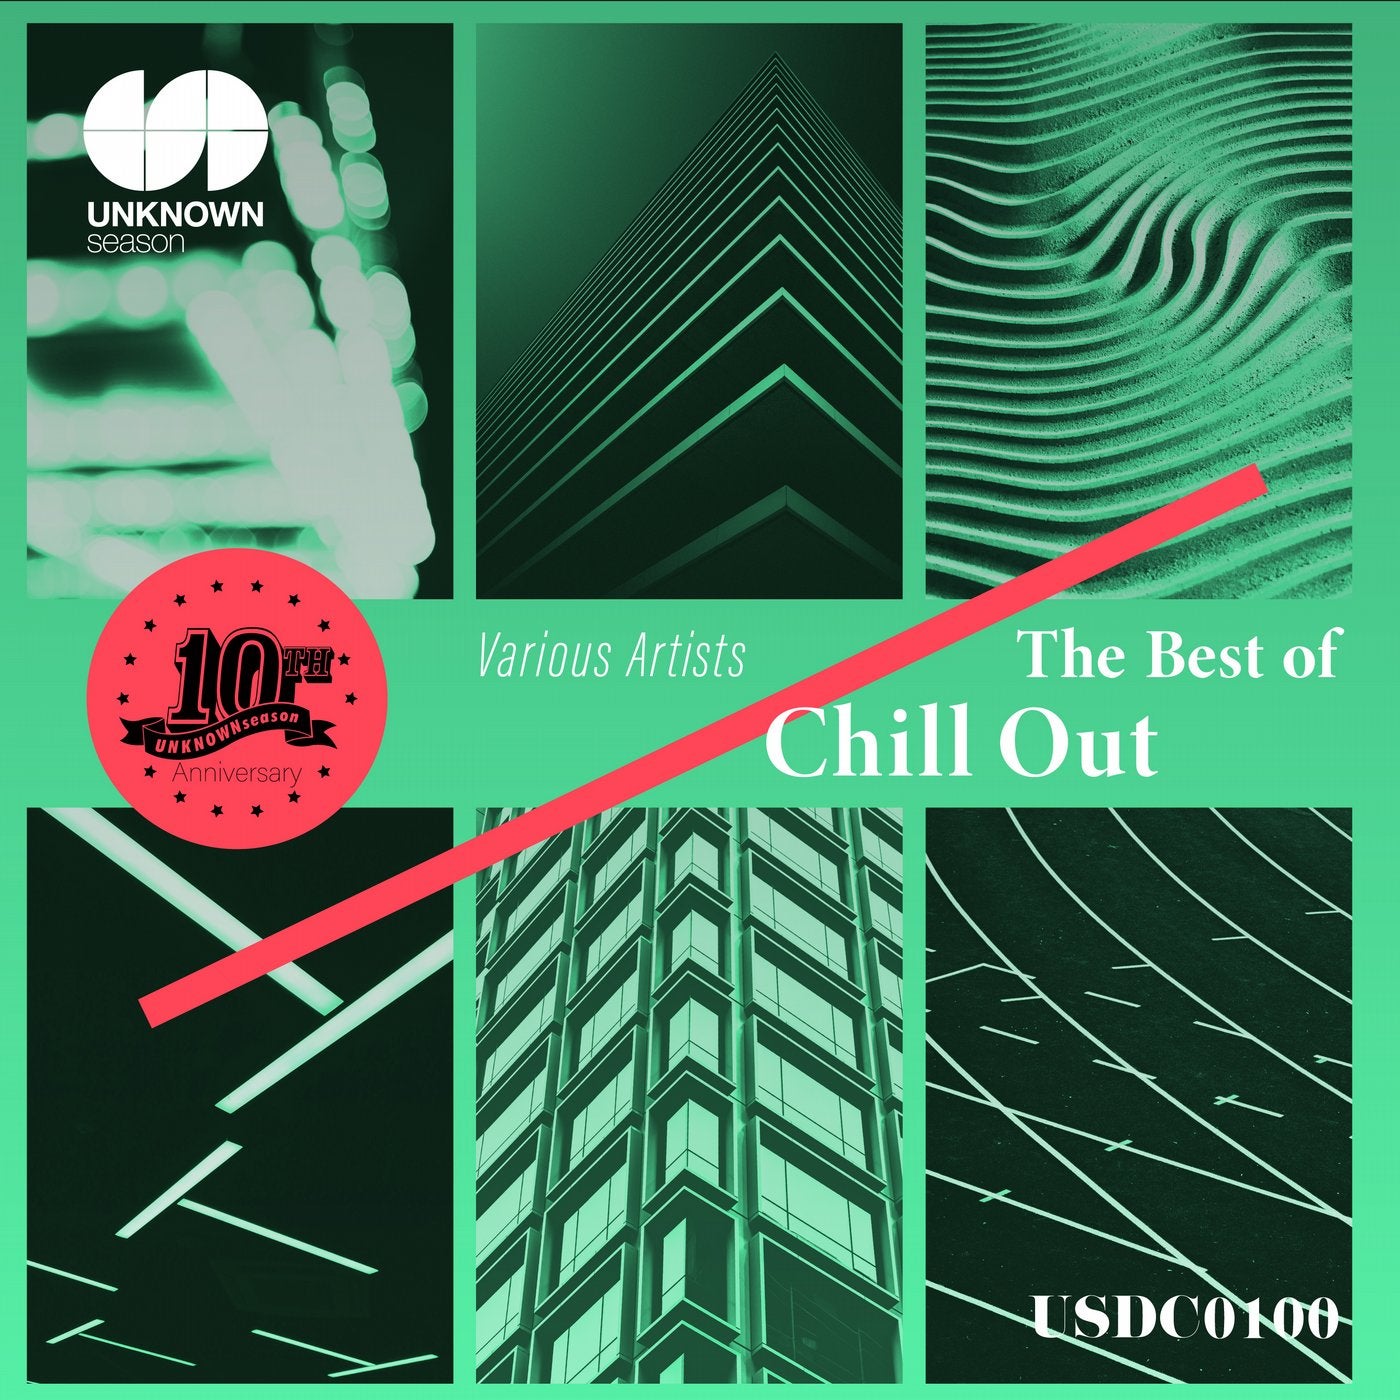 The Best of Chill Out